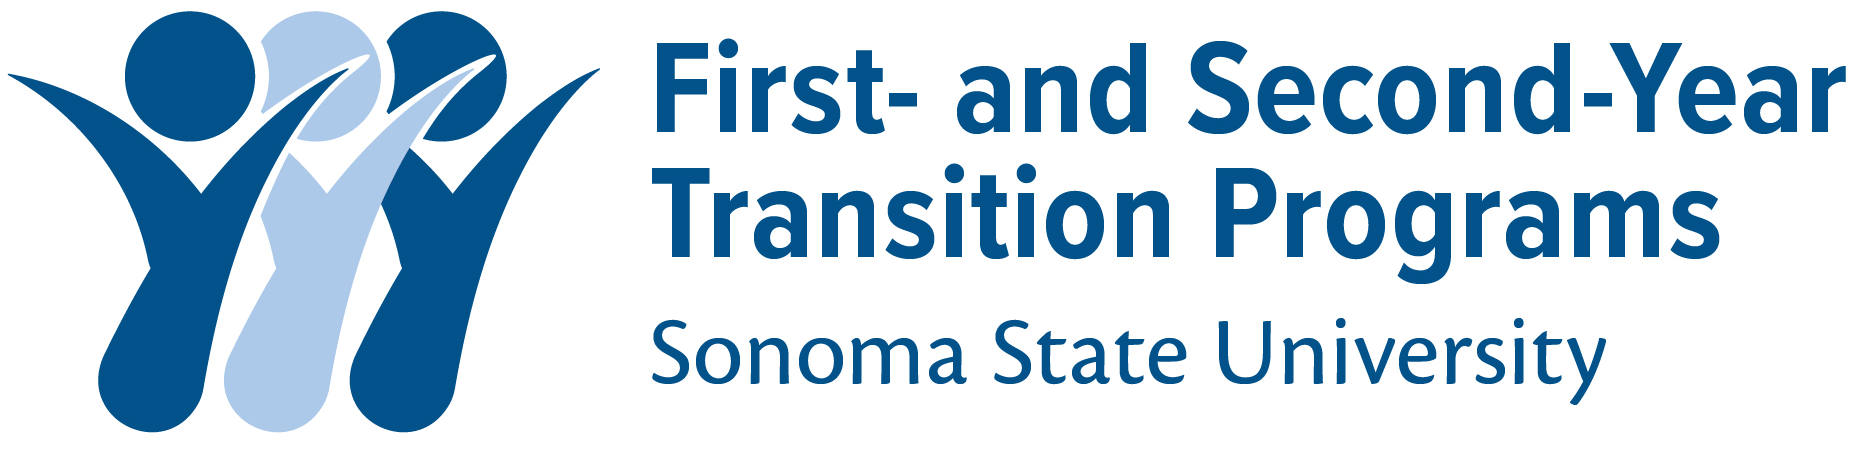 First- and Second-Year Transition Programs